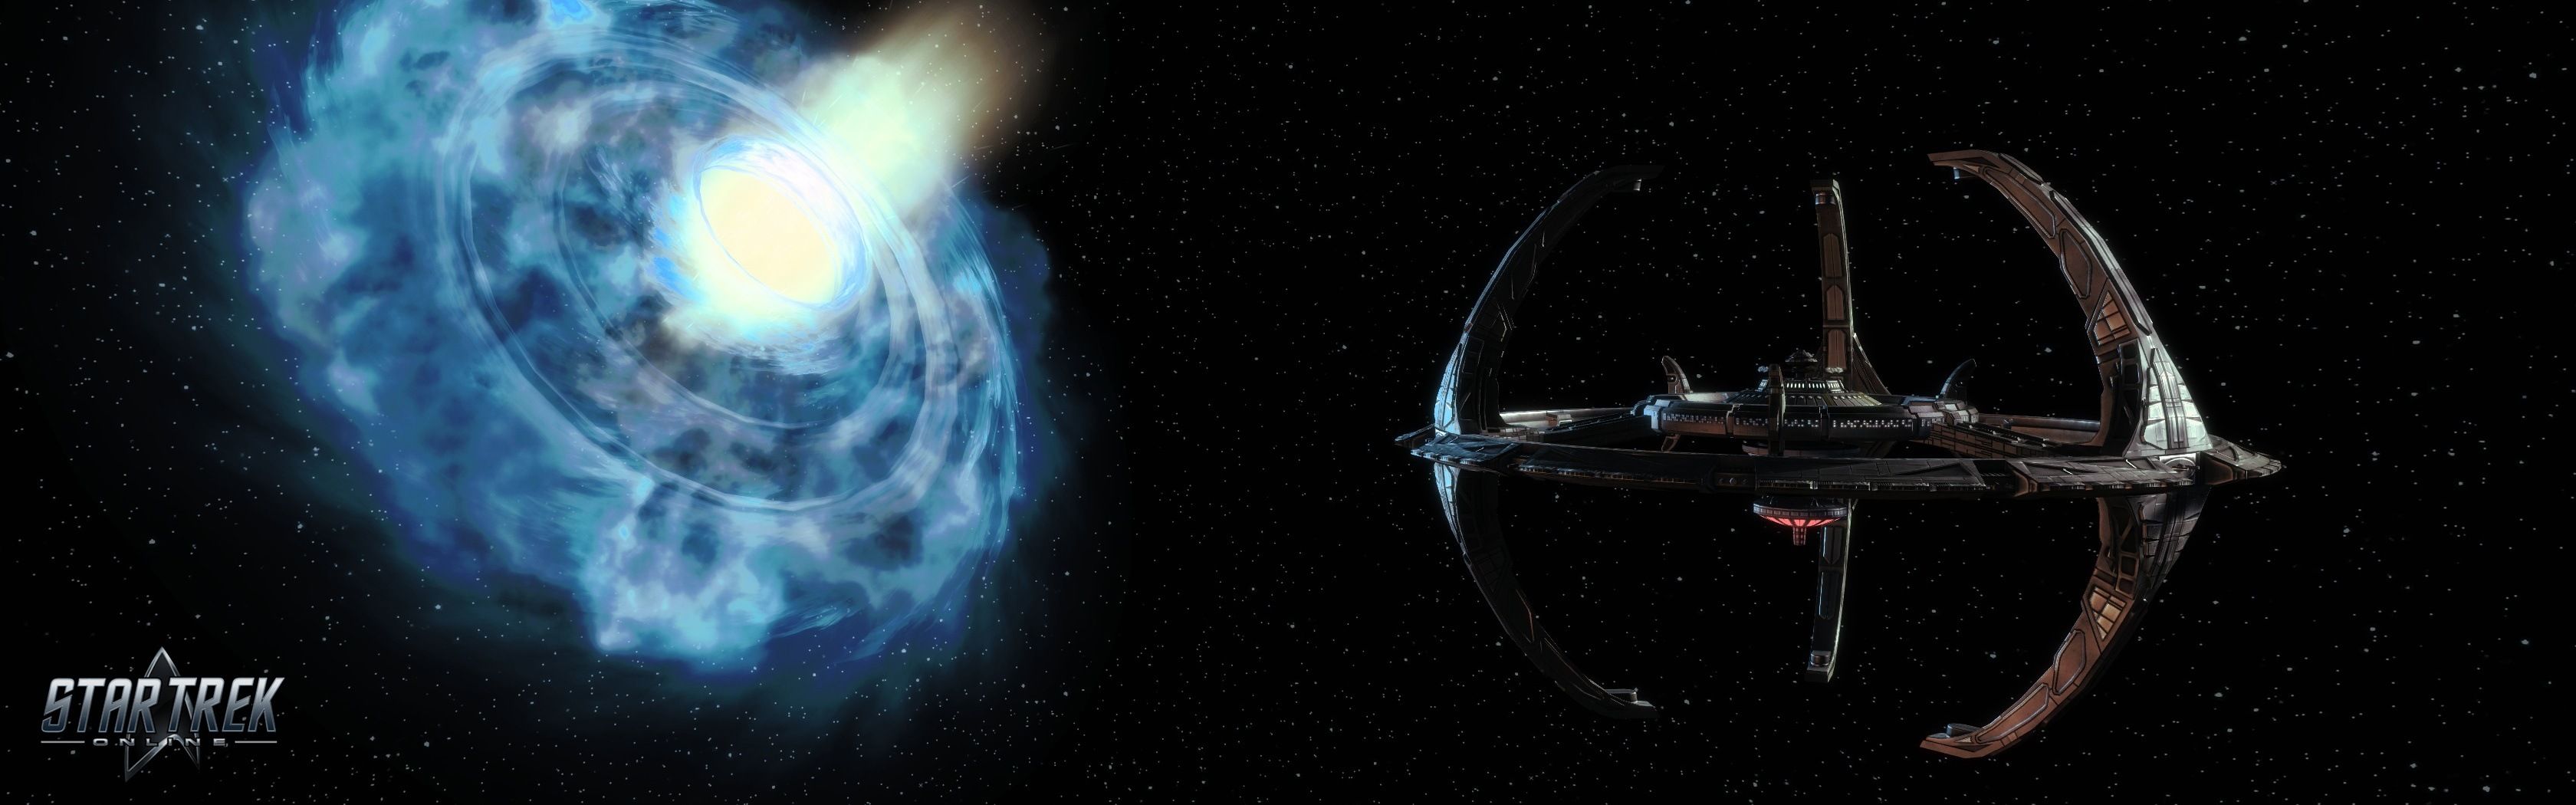 Star Trek Online HD Wallpapers and Backgrounds